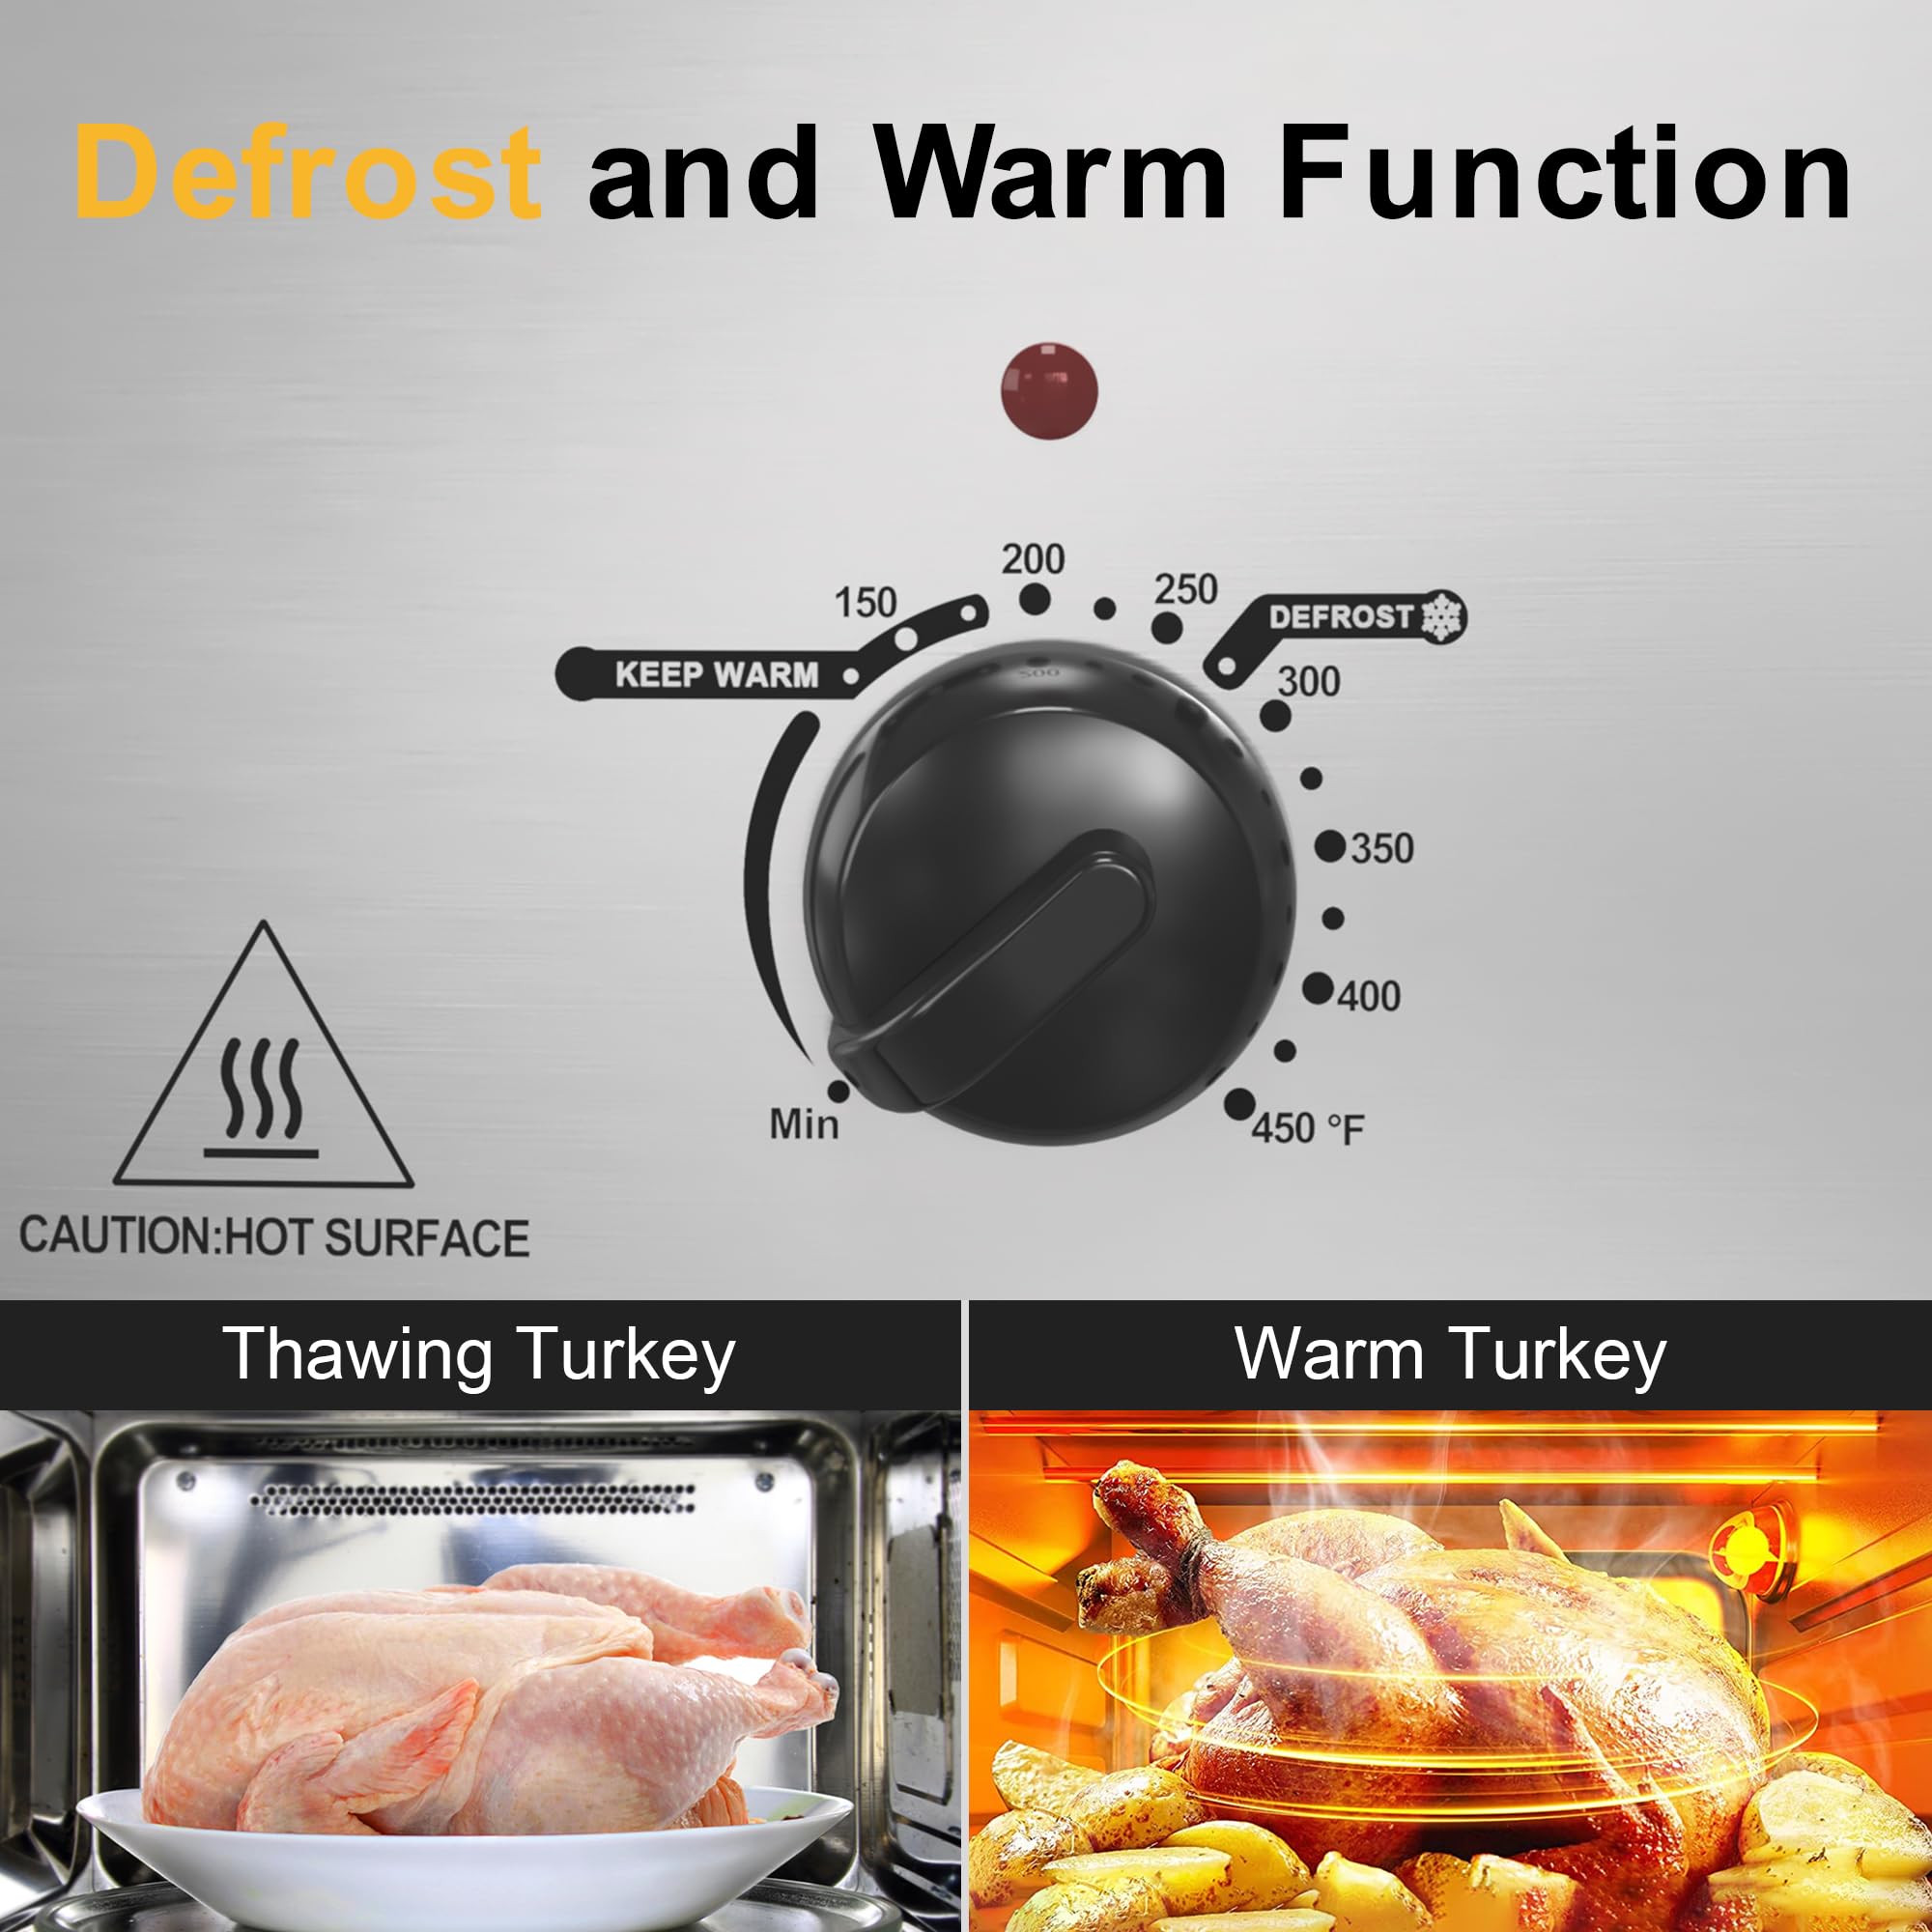 Sunvivi Electric Roaster, 18 Quart Roasting Oven with Self-Basting Lid Removable Pan, Turkey Roaster Oven with 150 to 450F Temperature Control Cool-Touch Handles, Silver